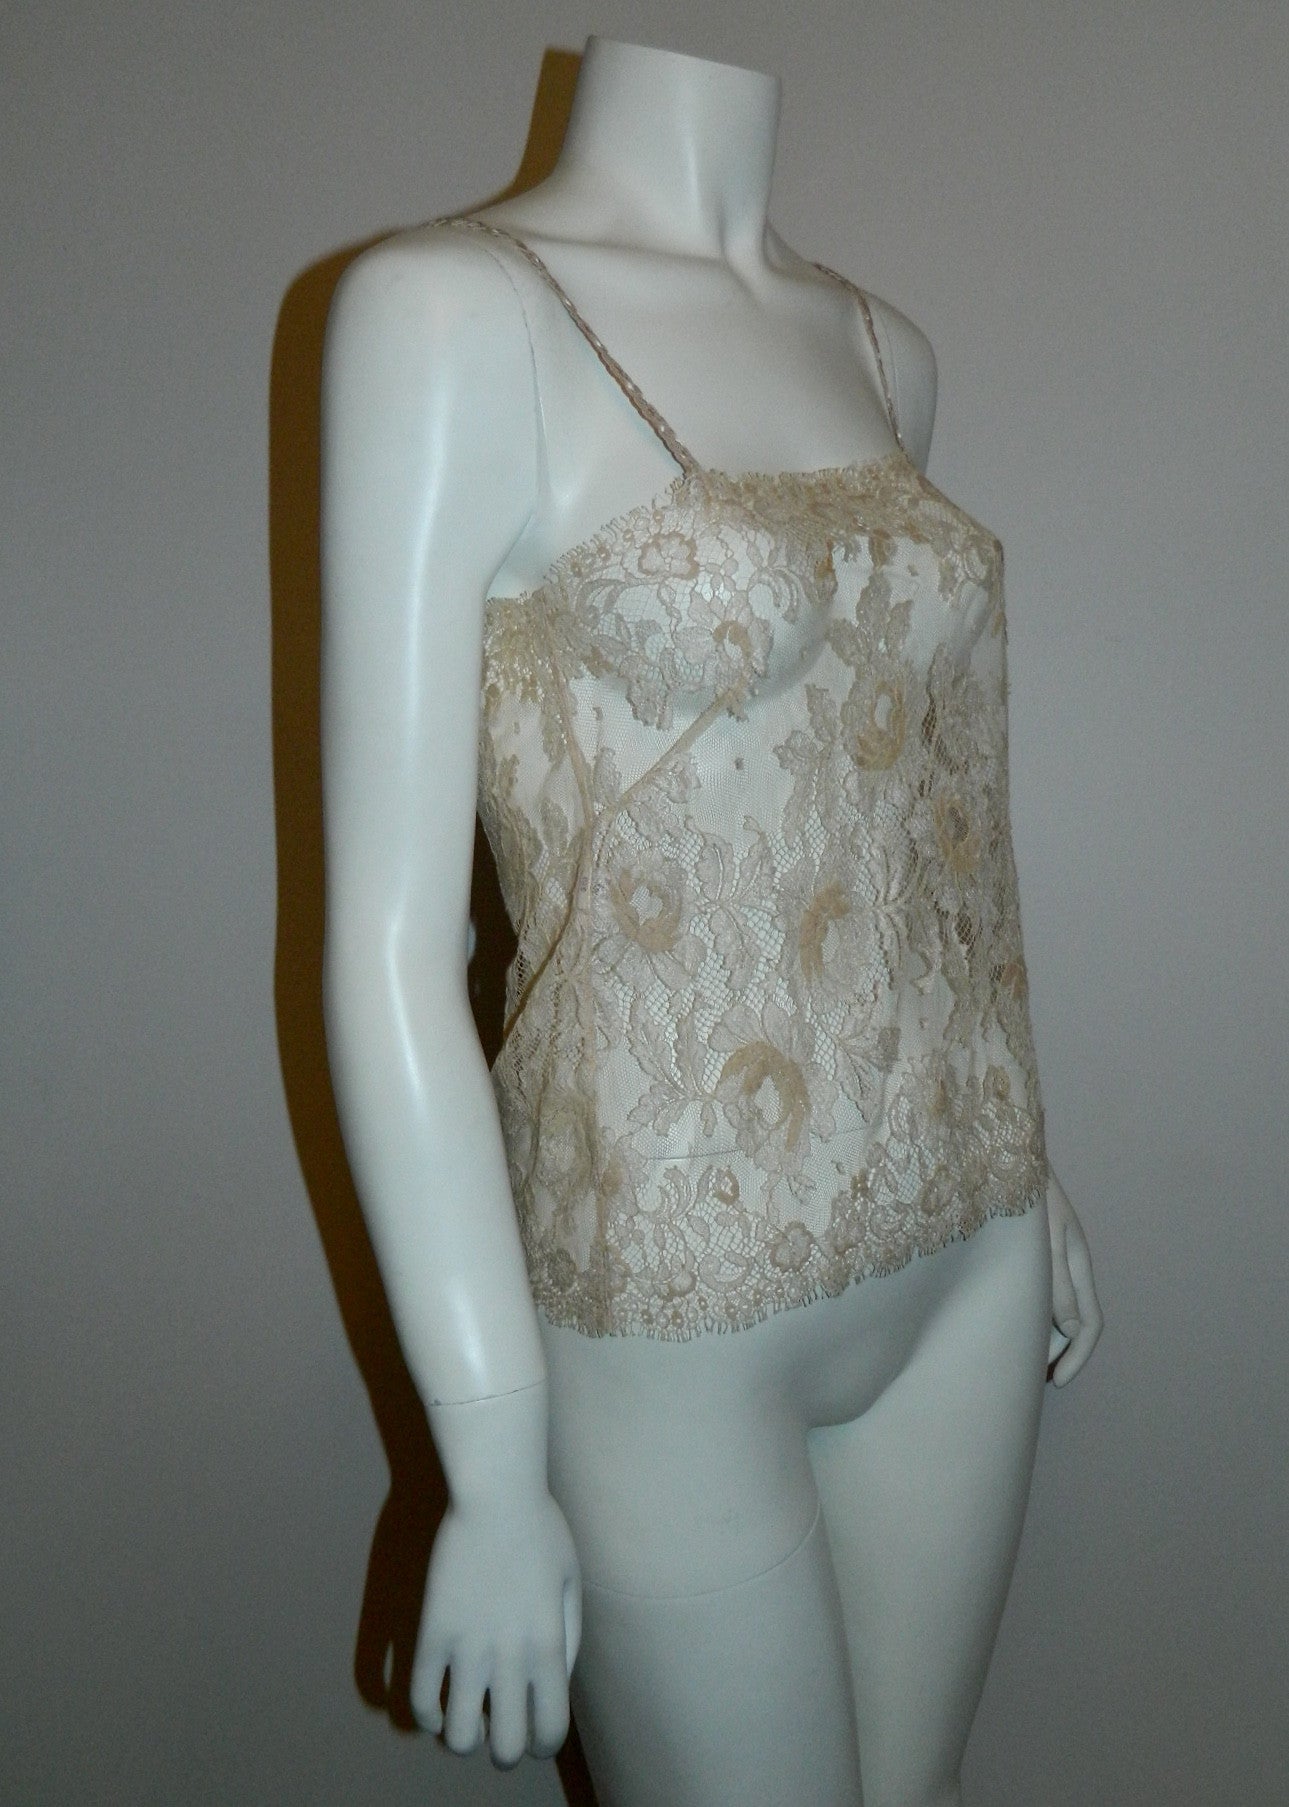 lace camisole AUBADE buff cream lacy tank top shell XS – Retro Trend Vintage